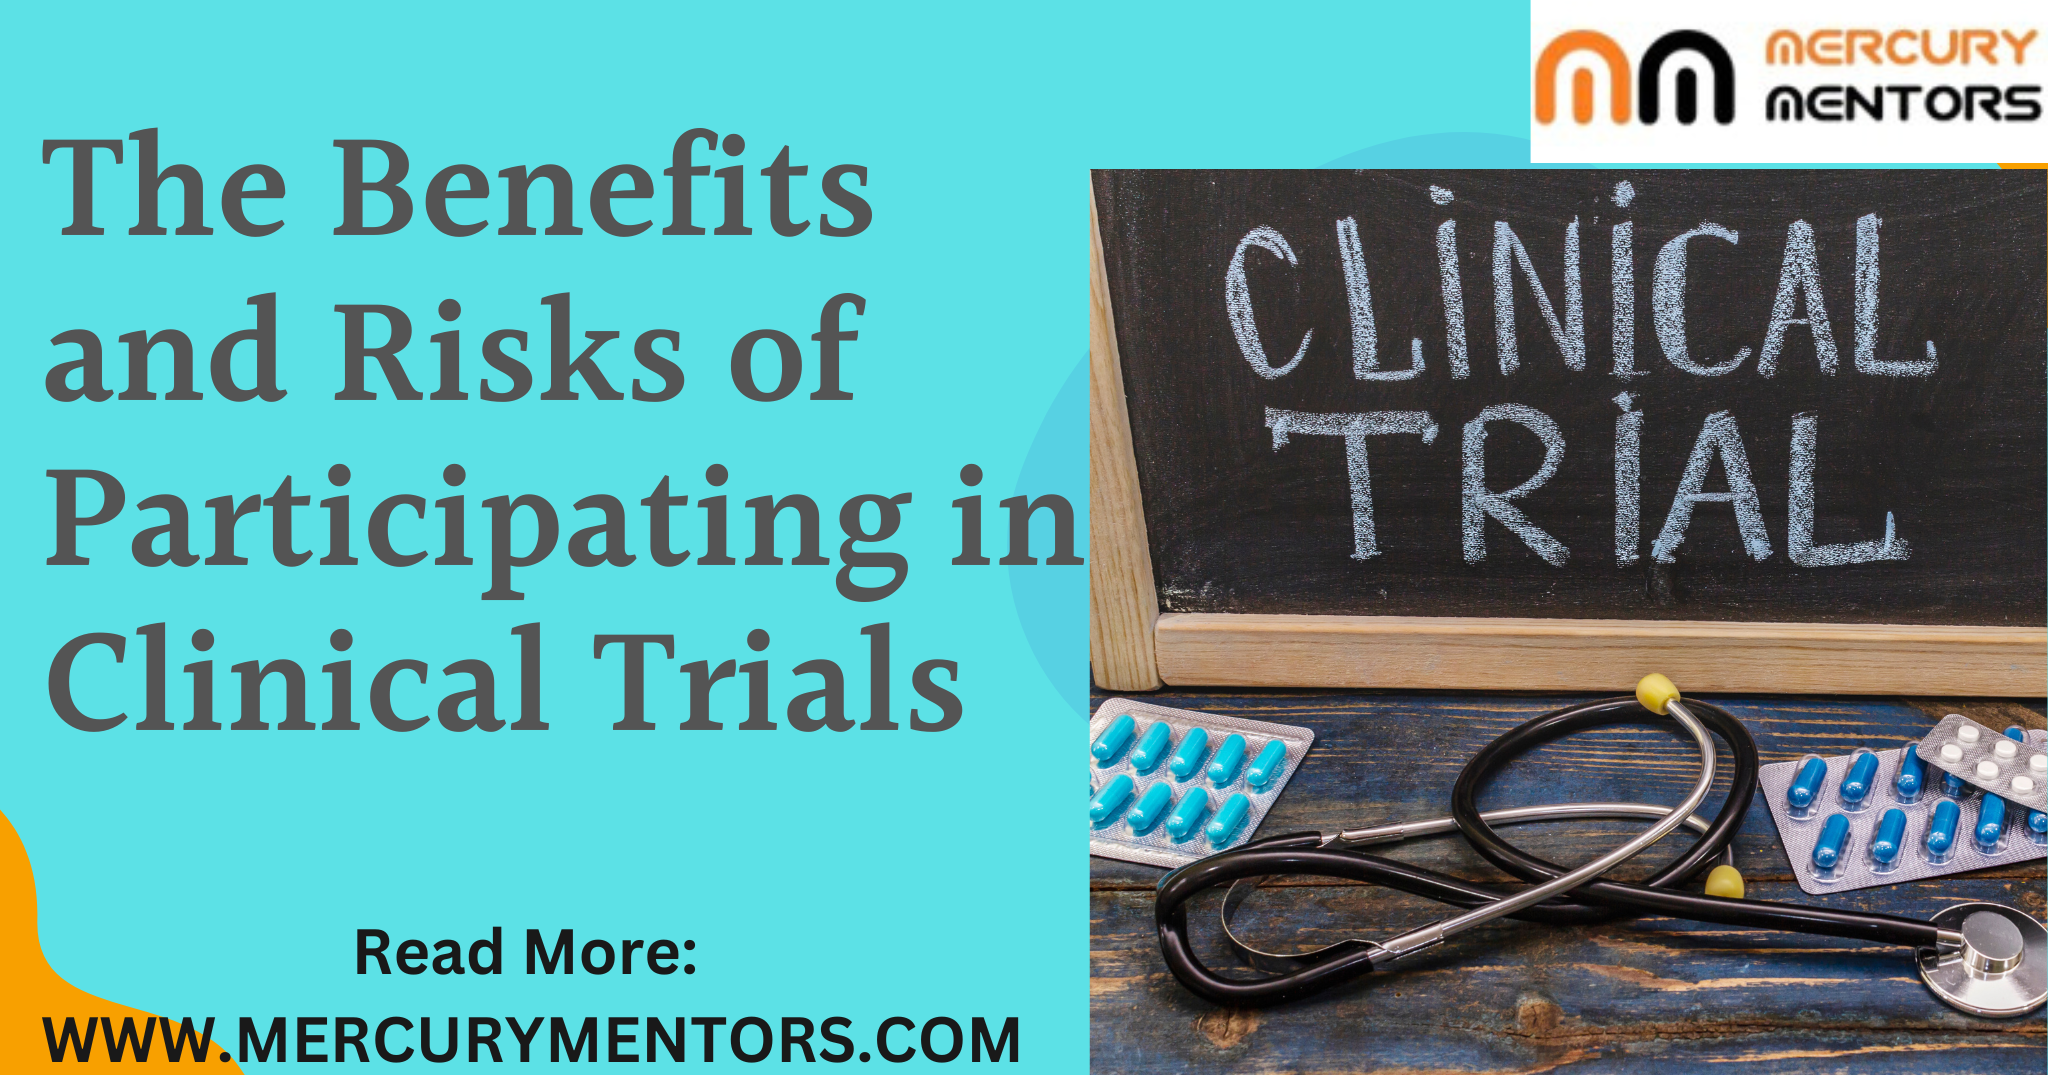 The Benefits and Risks of Participating in Clinical Trials